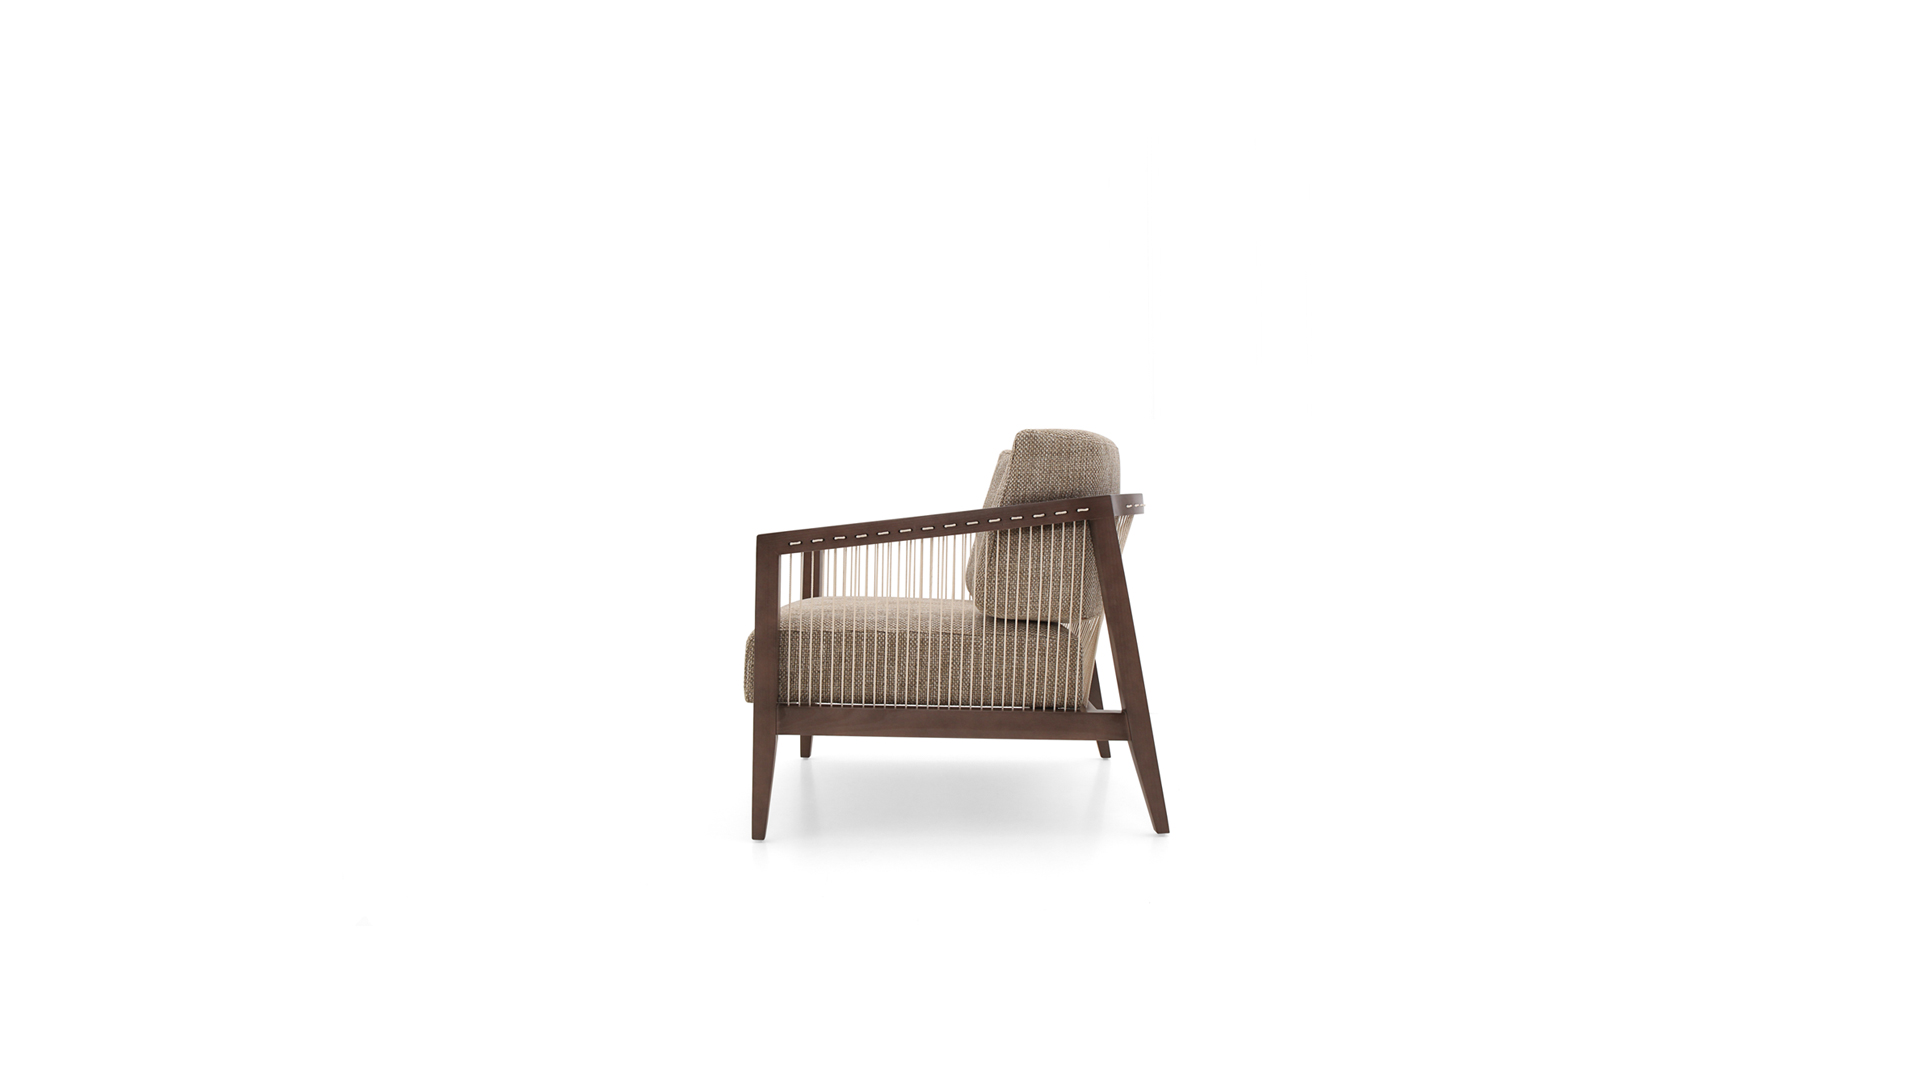 Luxury Armchair Lacome by Luxuria London